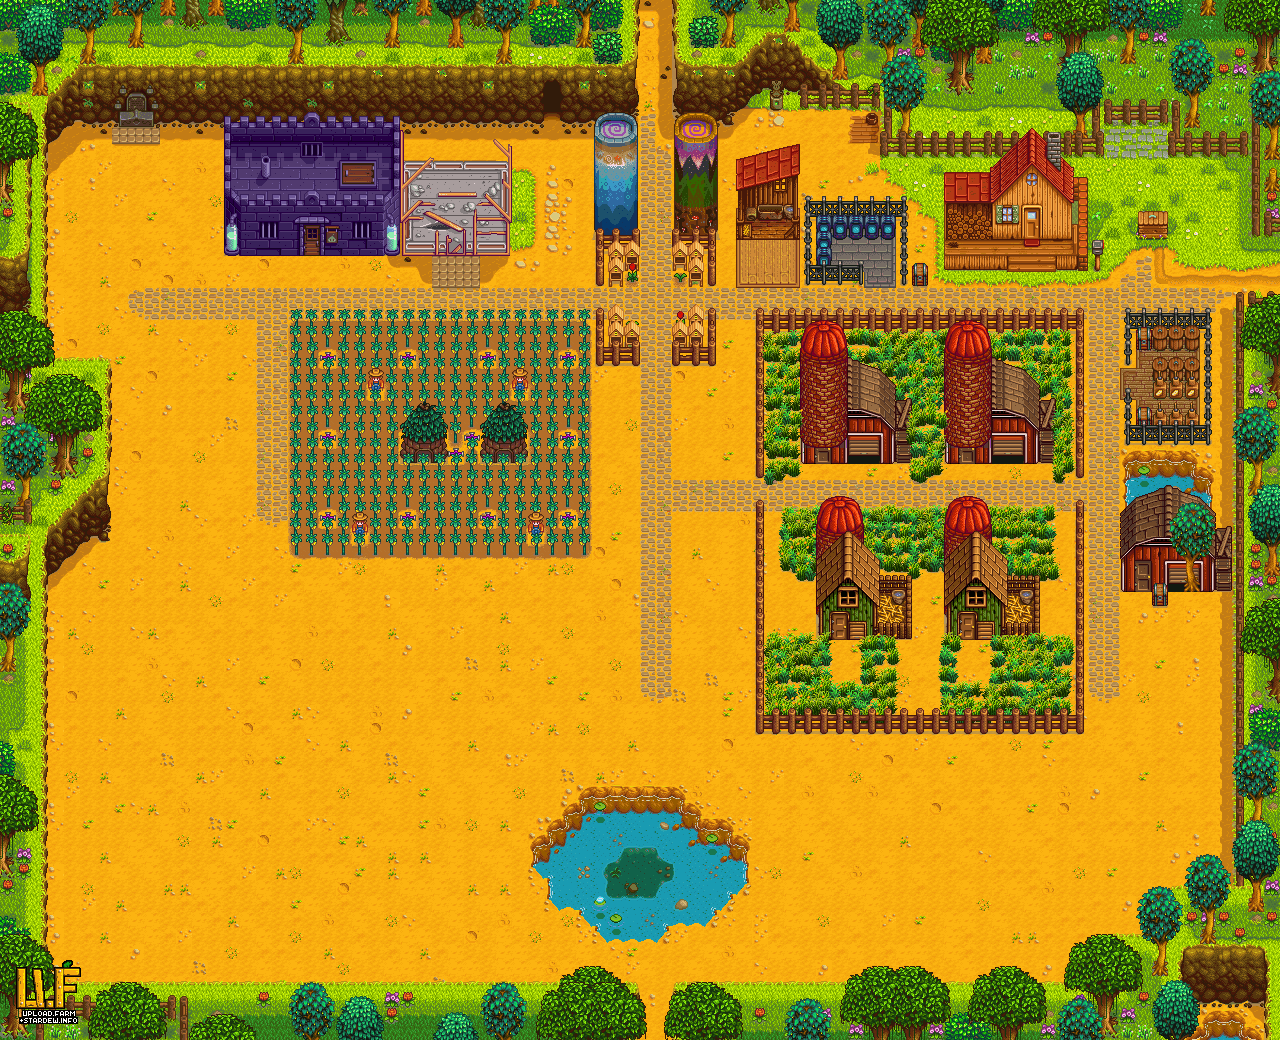 Download Rough Draft On Farm Redesign Thoughts - Stardew Valley Junimo